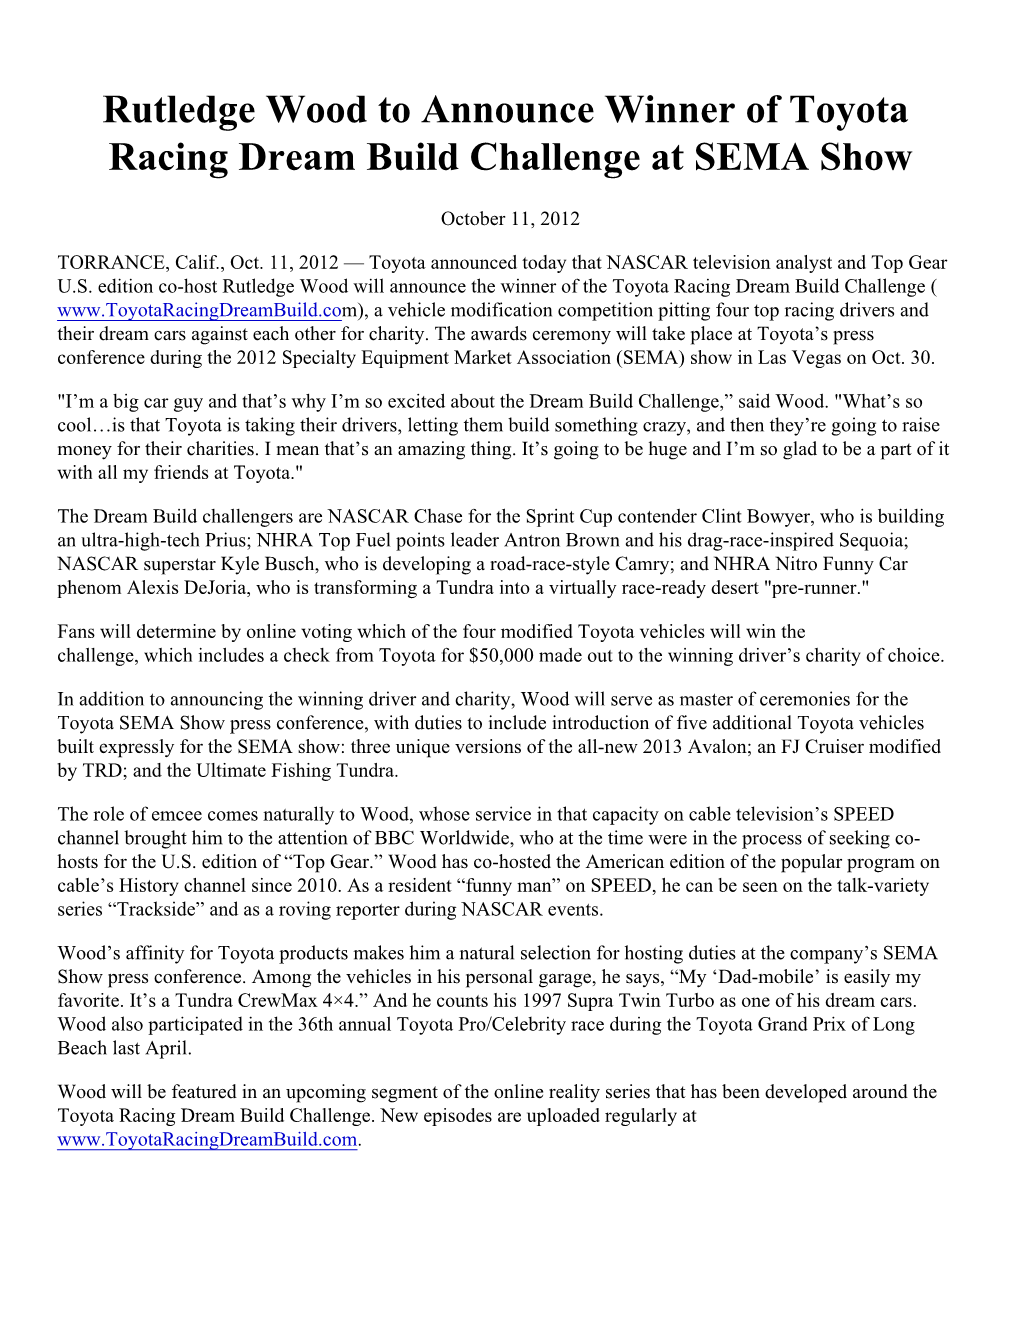 Rutledge Wood to Announce Winner of Toyota Racing Dream Build Challenge at SEMA Show